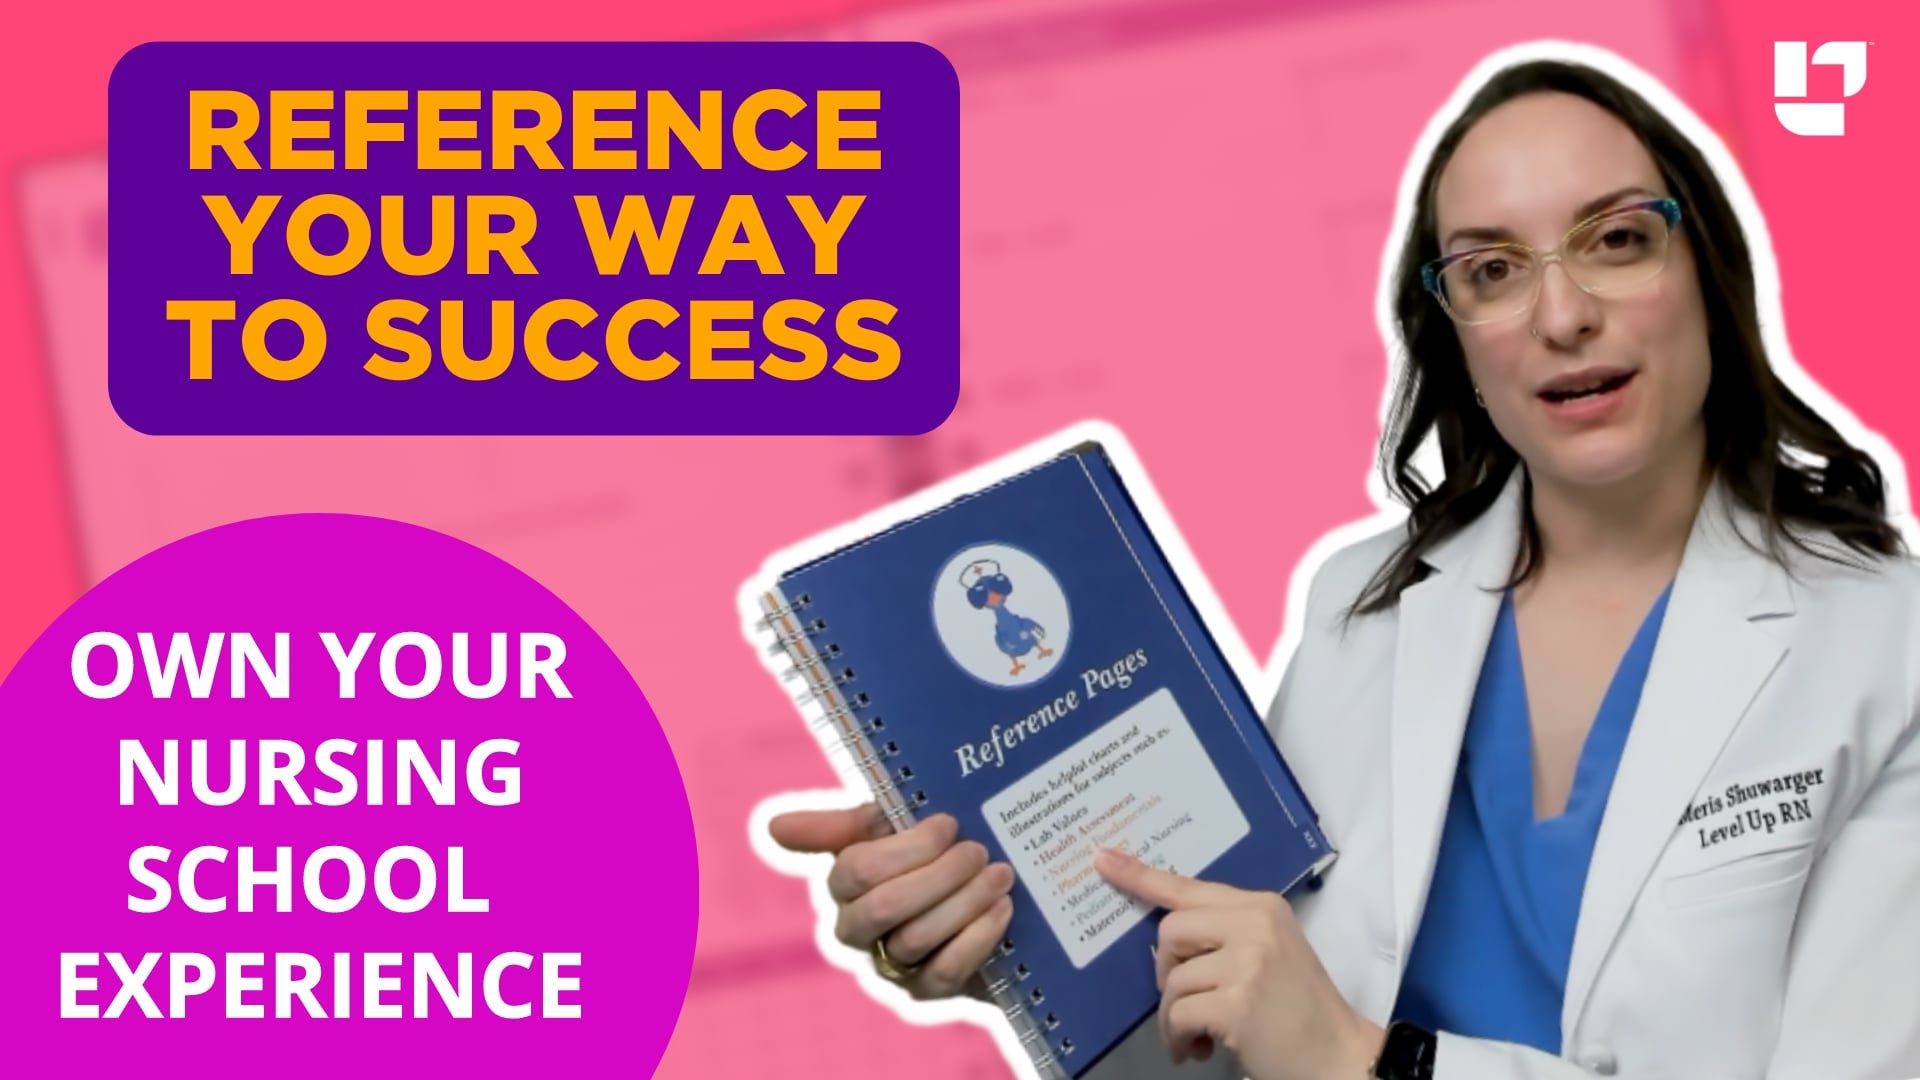 Reference Your Way to Success - Owning Your Nursing School Journey - LevelUpRN